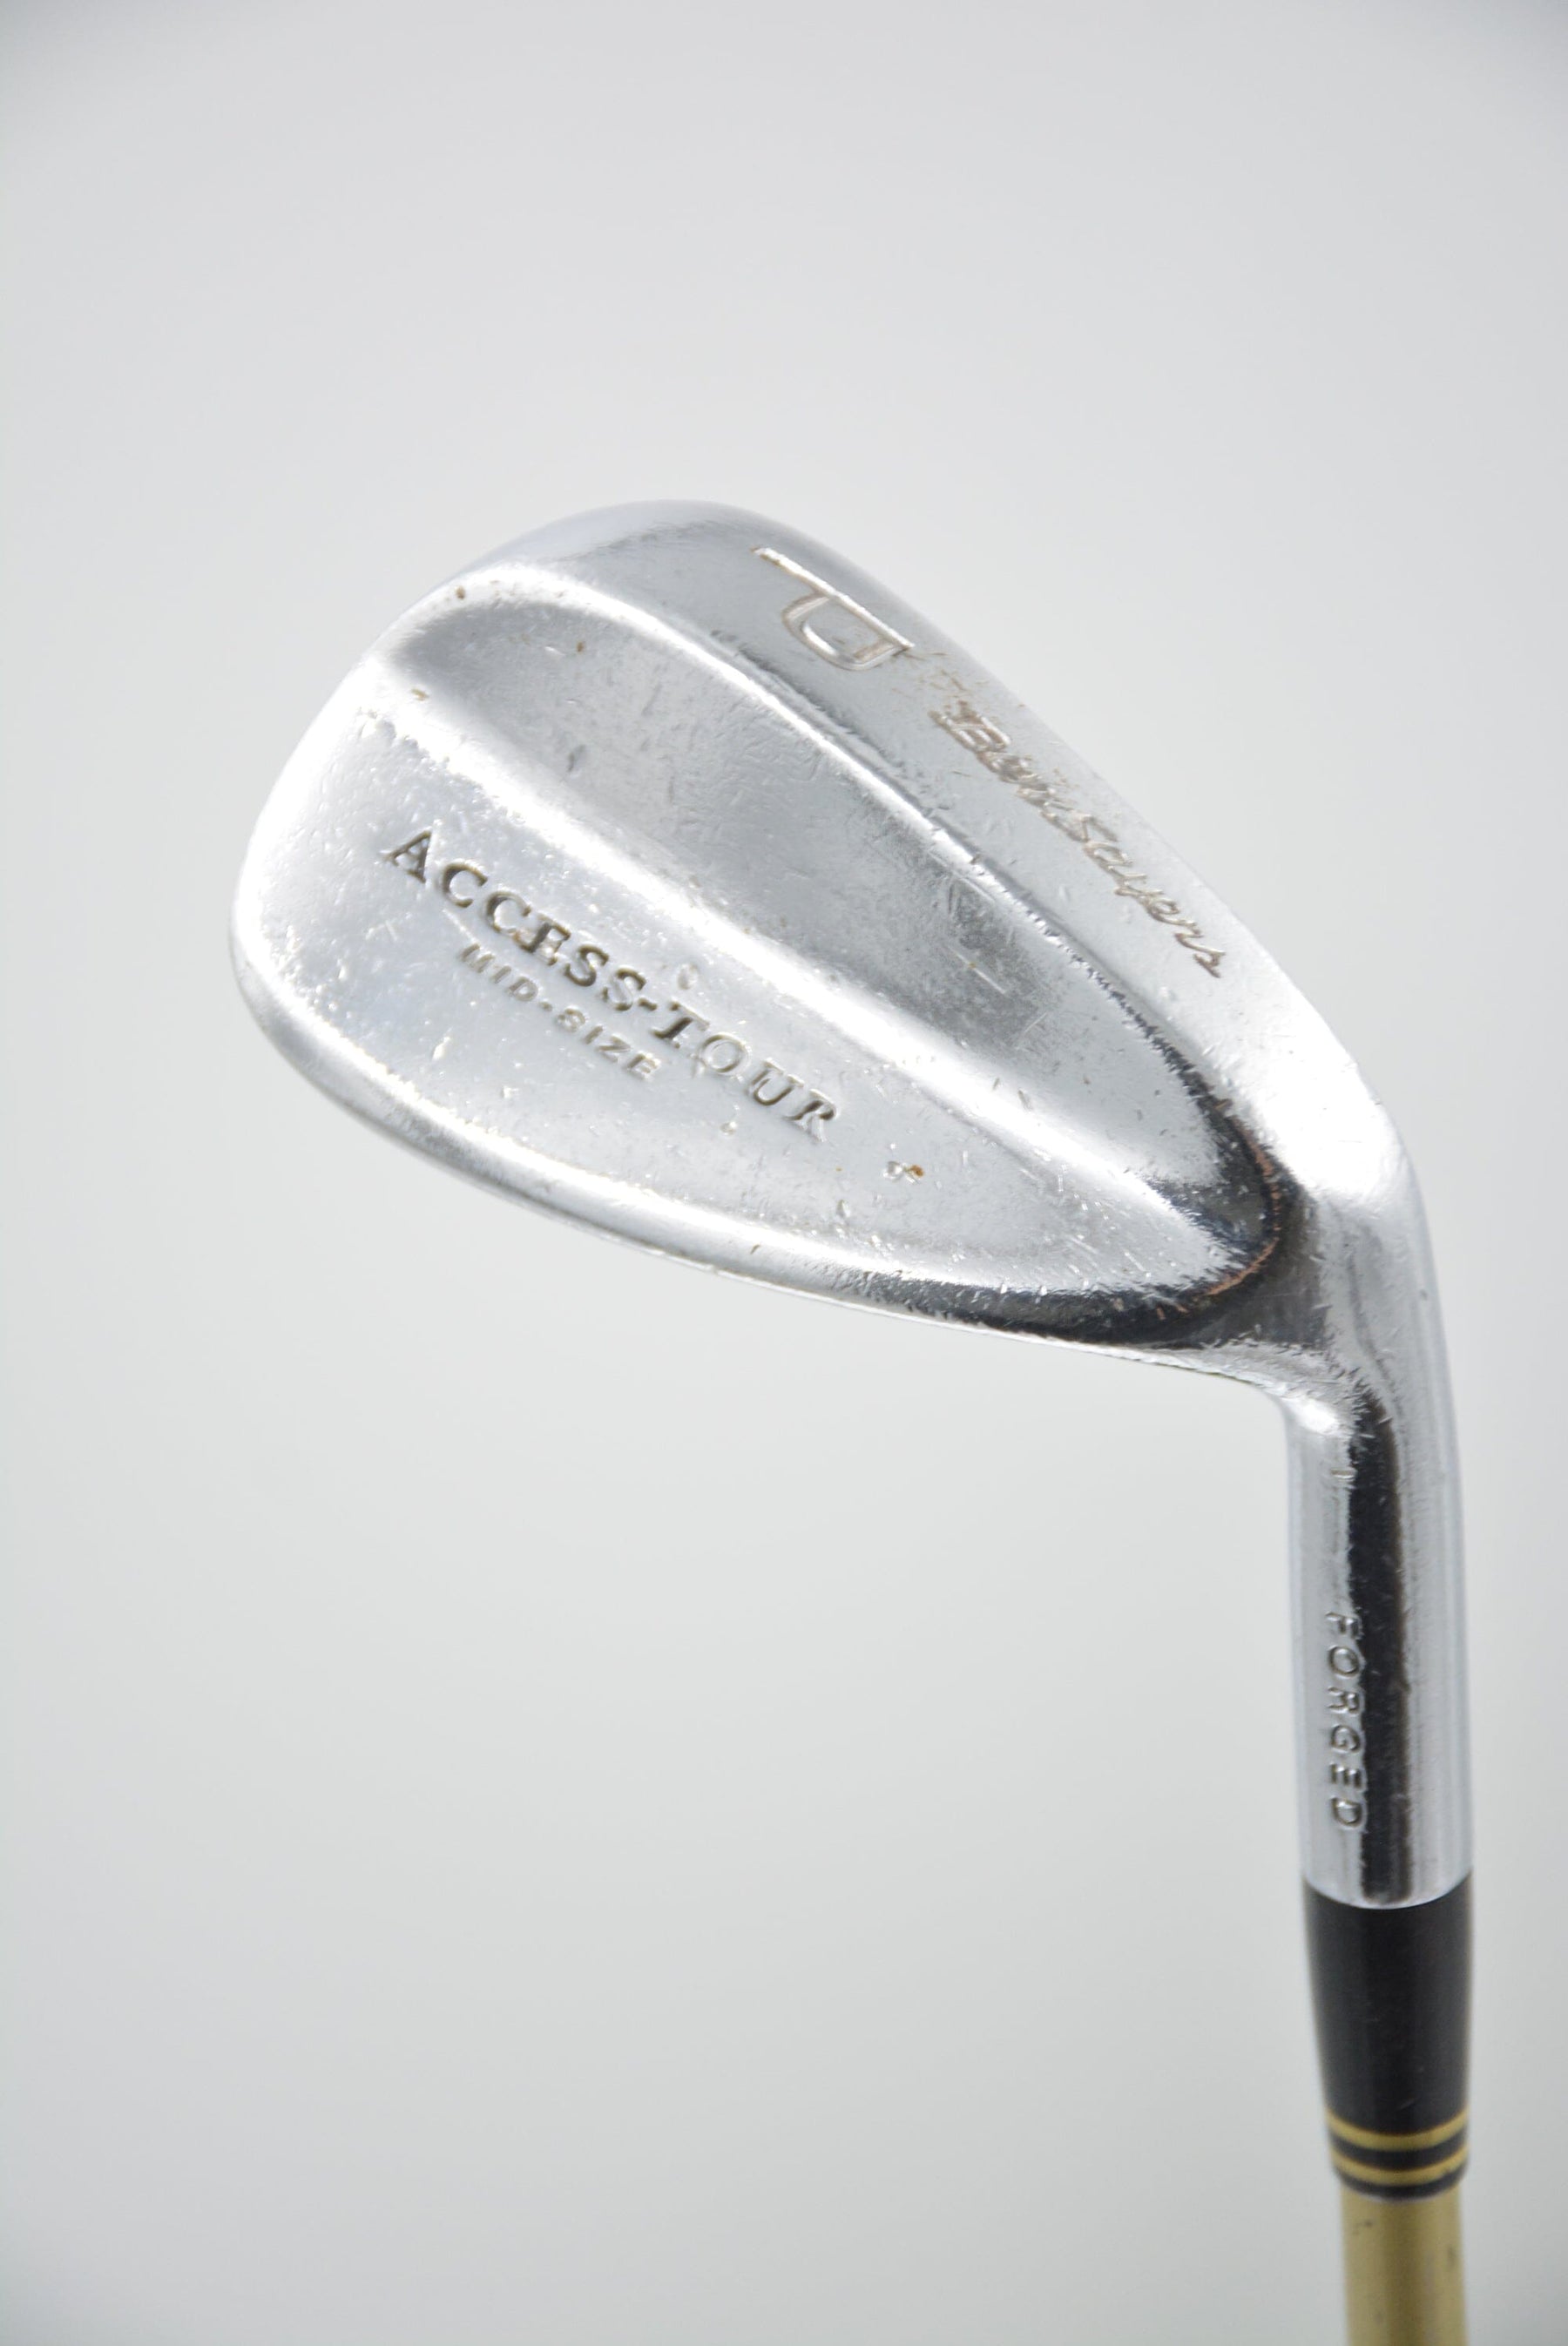 Ben Sayers Access Tour Midsize Forged PW Wedge R Flex Golf Clubs GolfRoots 